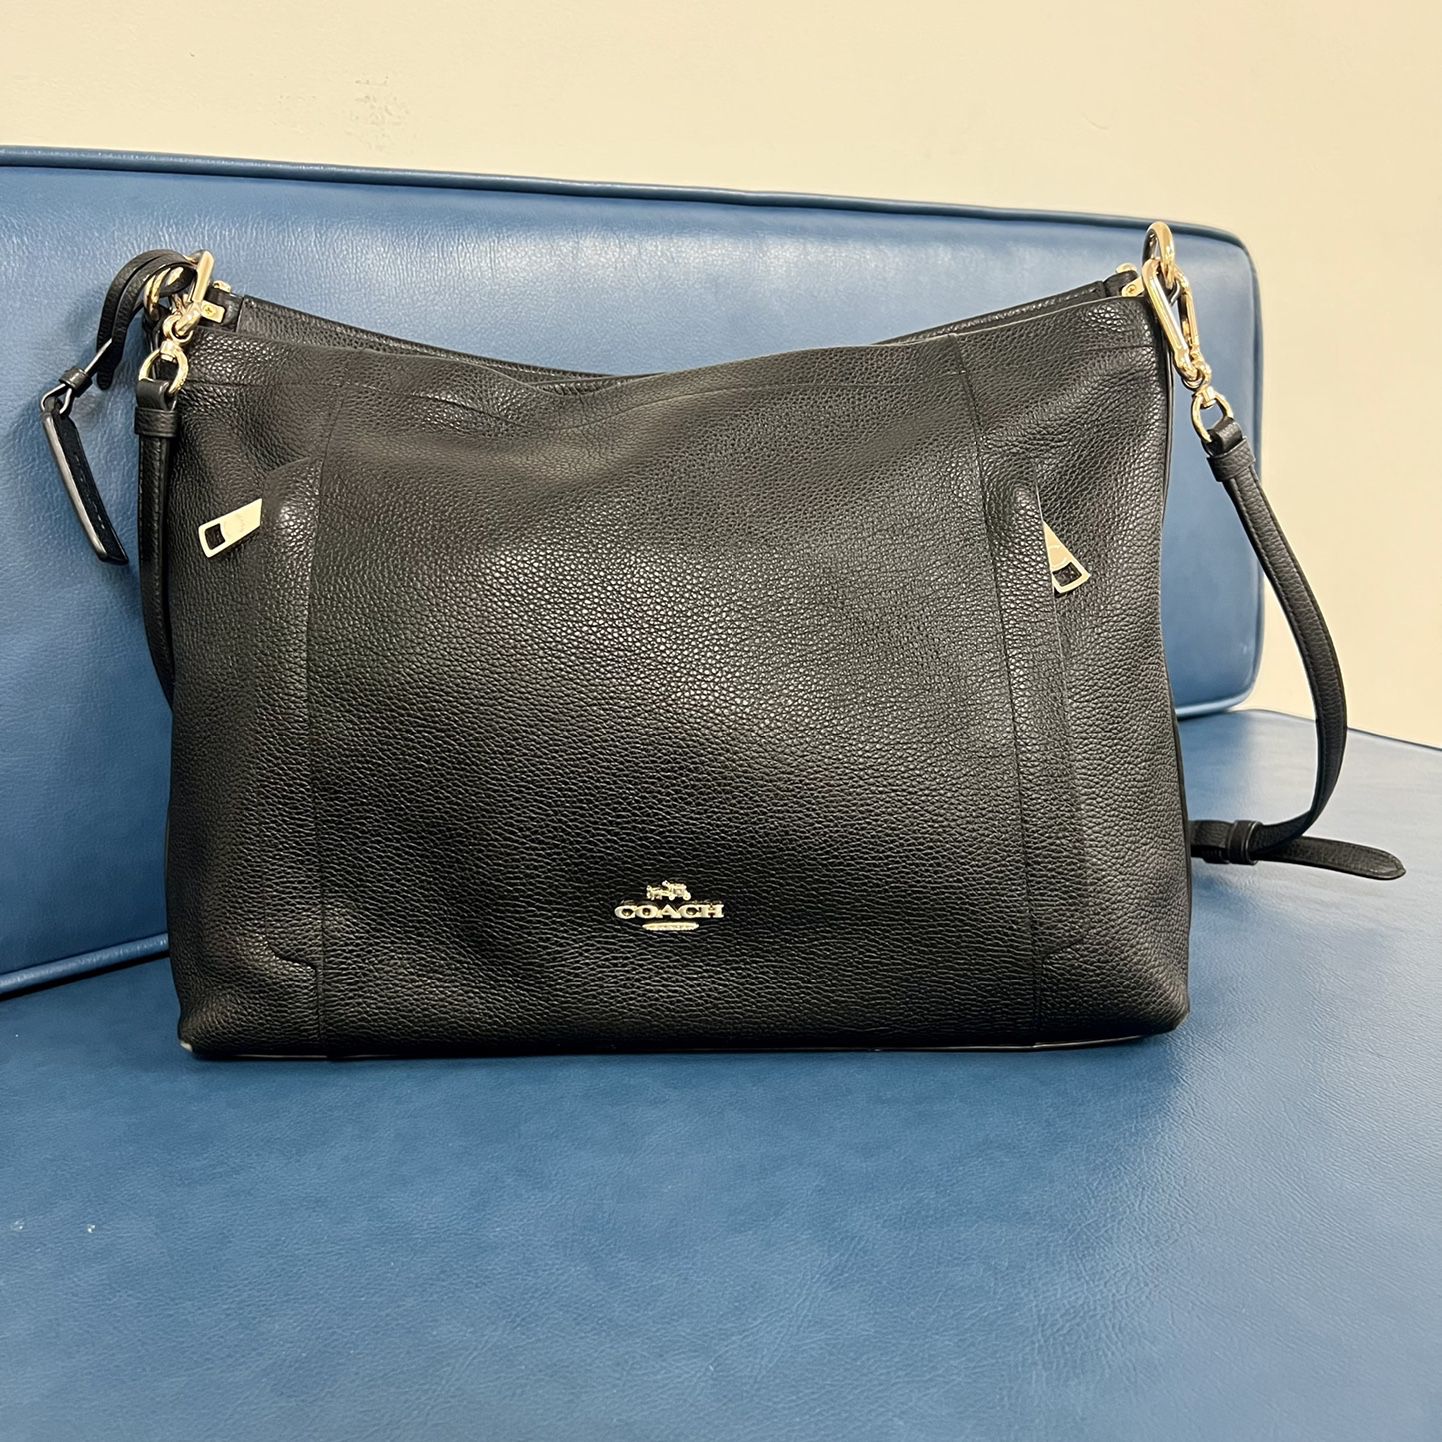 Black and Light Grey Coach Purse (price negotiable) for Sale in Tempe, AZ -  OfferUp